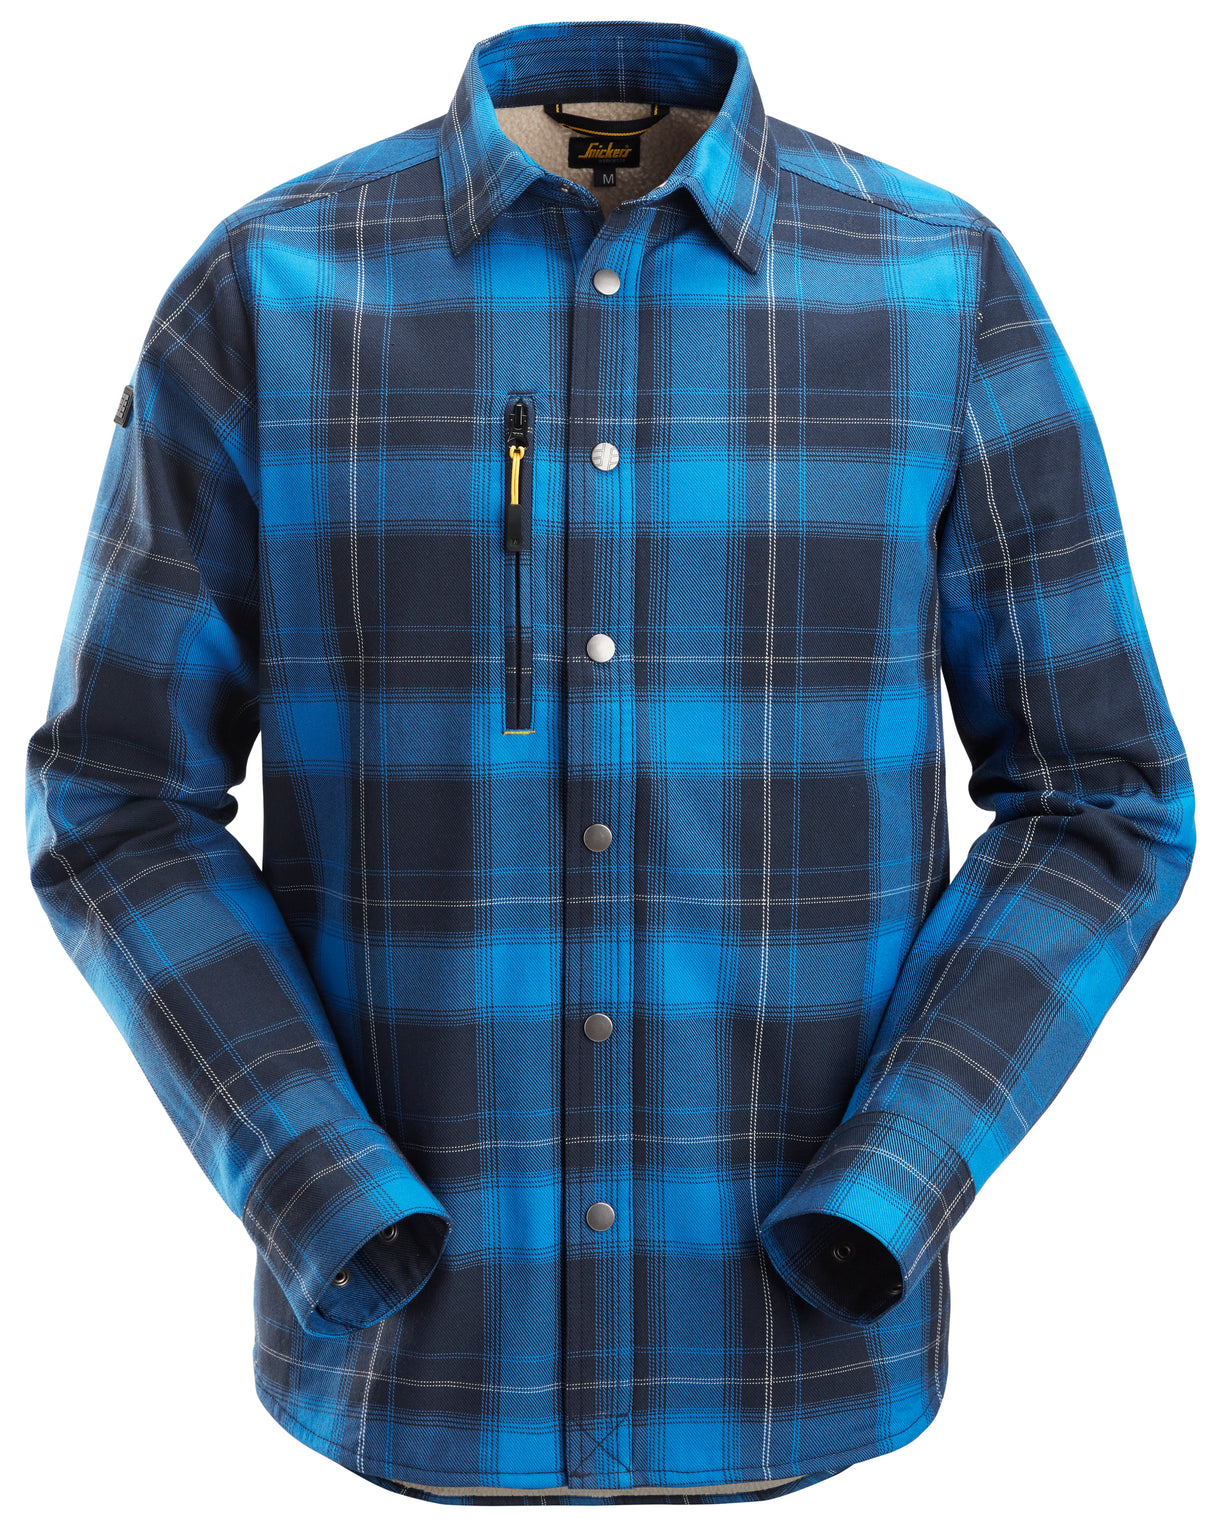 Snickers 8522 Allroundwork Insulated Shirt